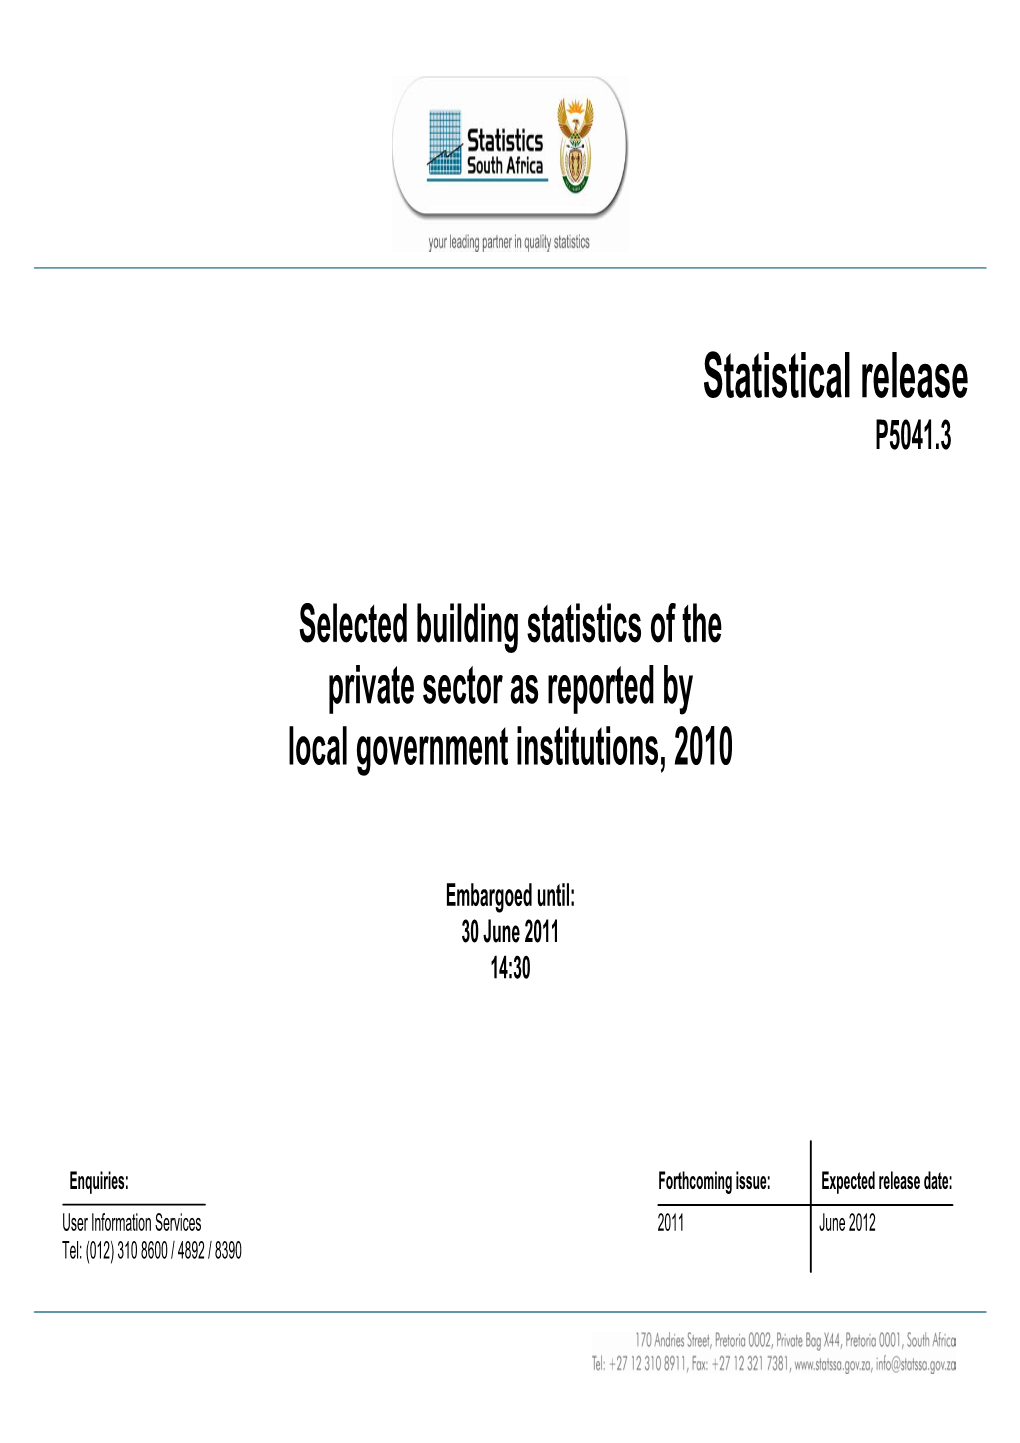 Statistical Release P5041.3